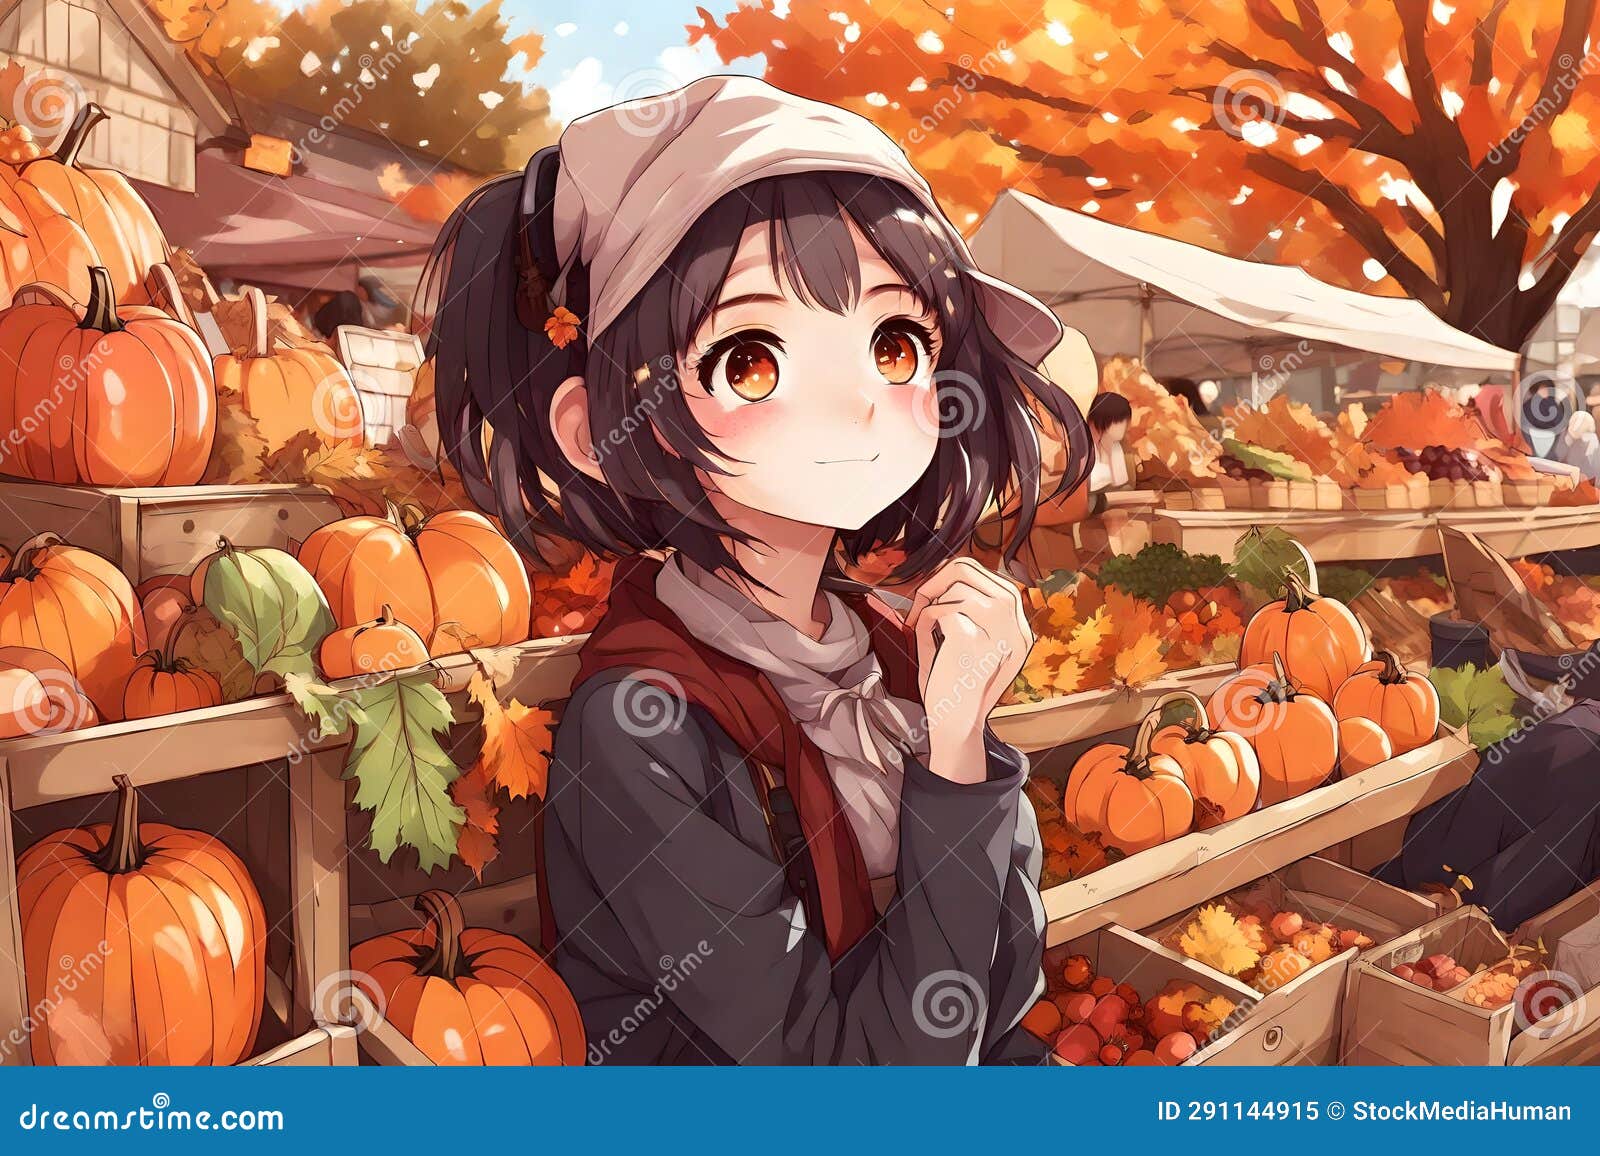 100+] Anime Thanksgiving Pfp Wallpapers | Wallpapers.com